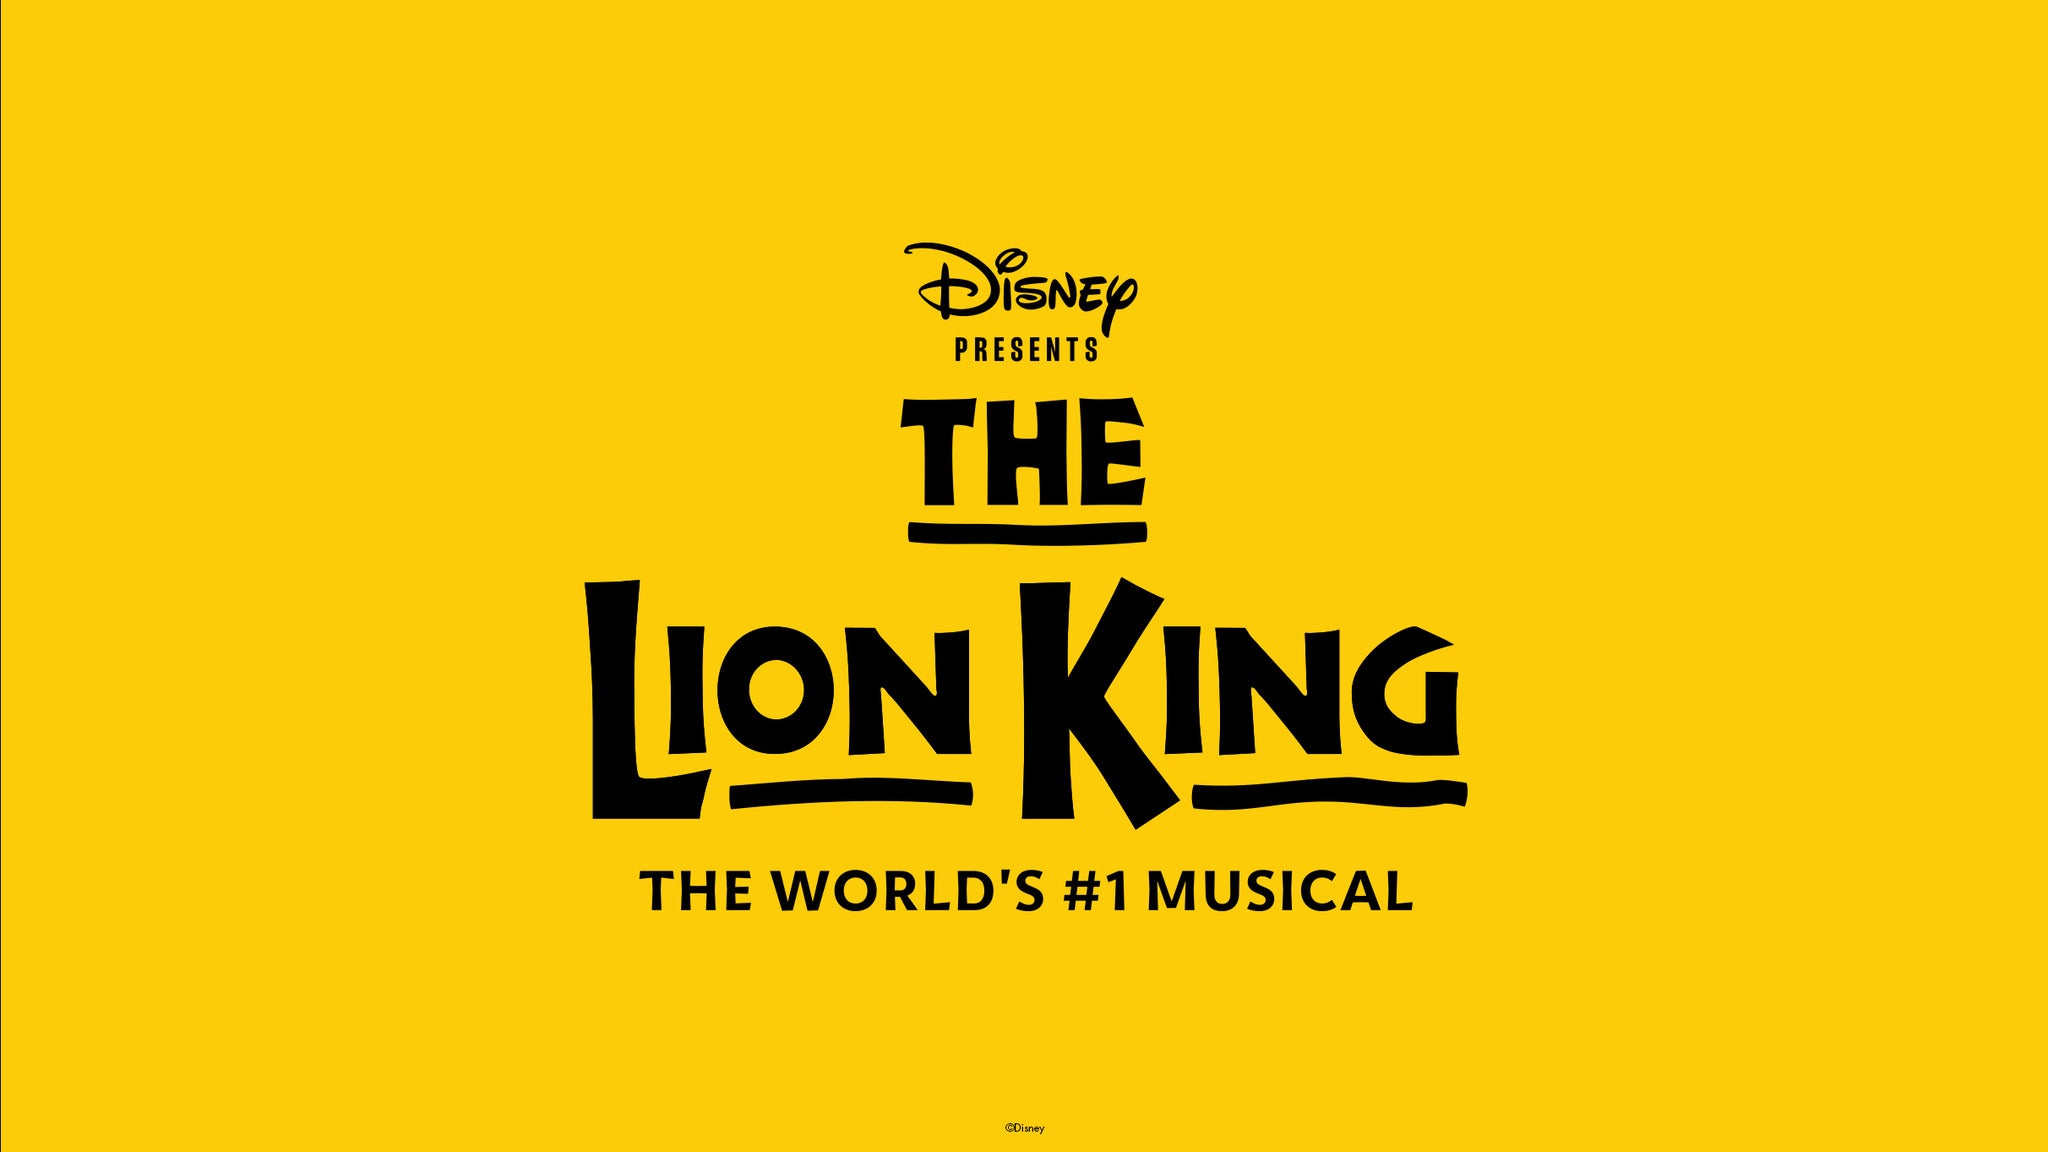 Disney's THE LION KING in Minneapolis event information